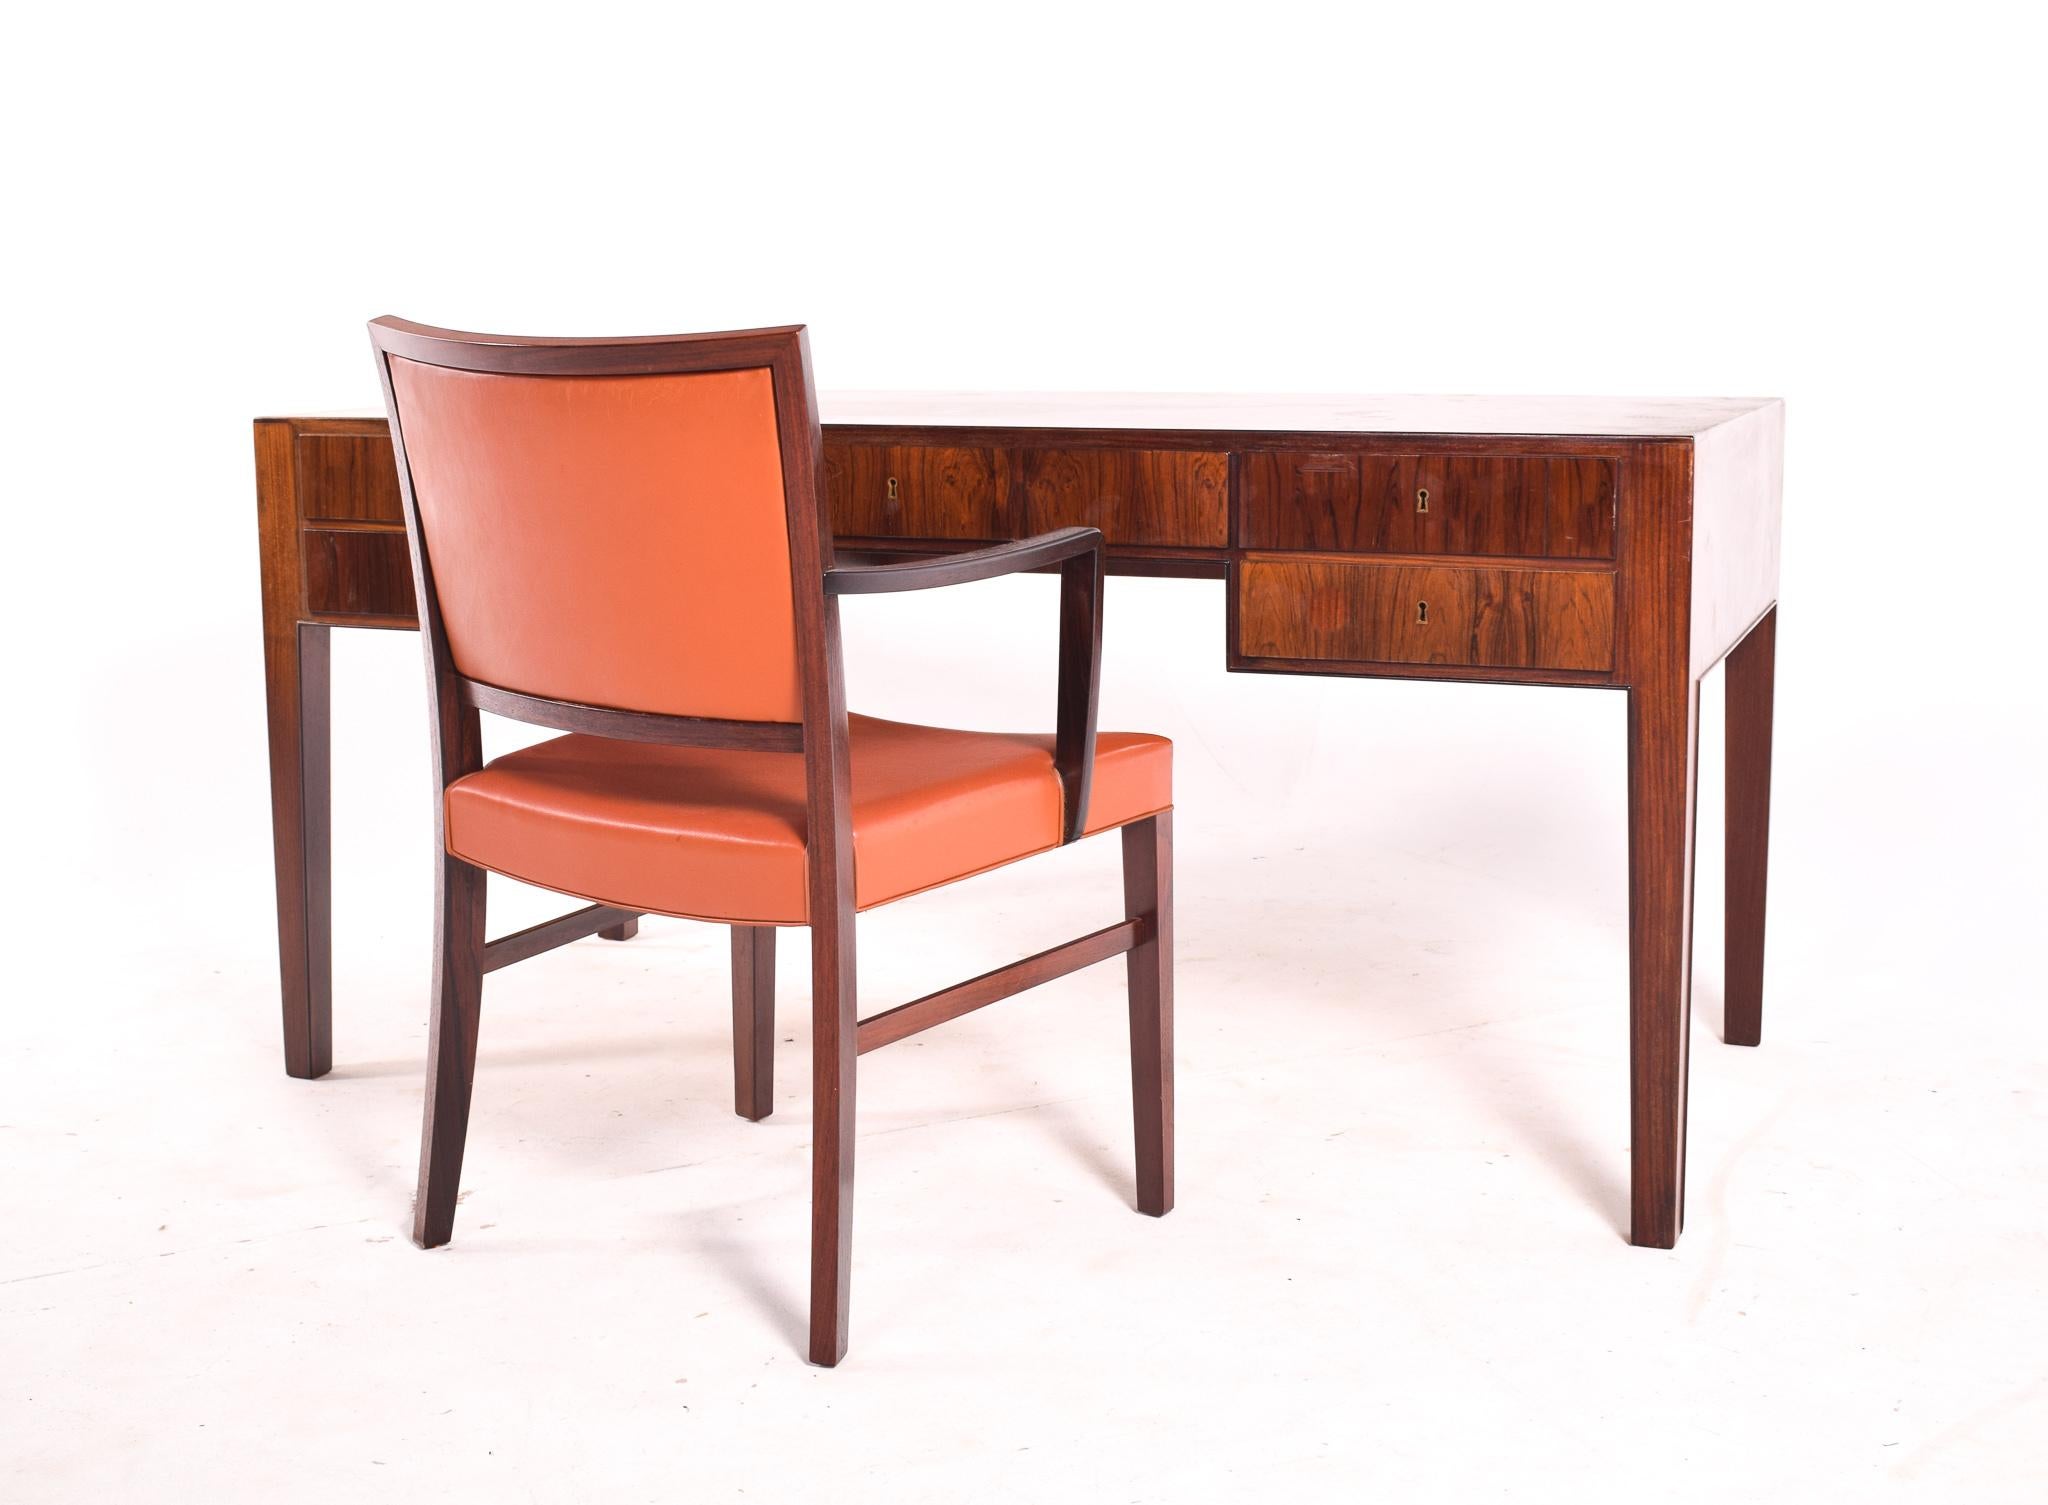 Mid-20th Century Rosewood Desk, Ole Wanscher by A. J. Iversen, 1950 and Chair